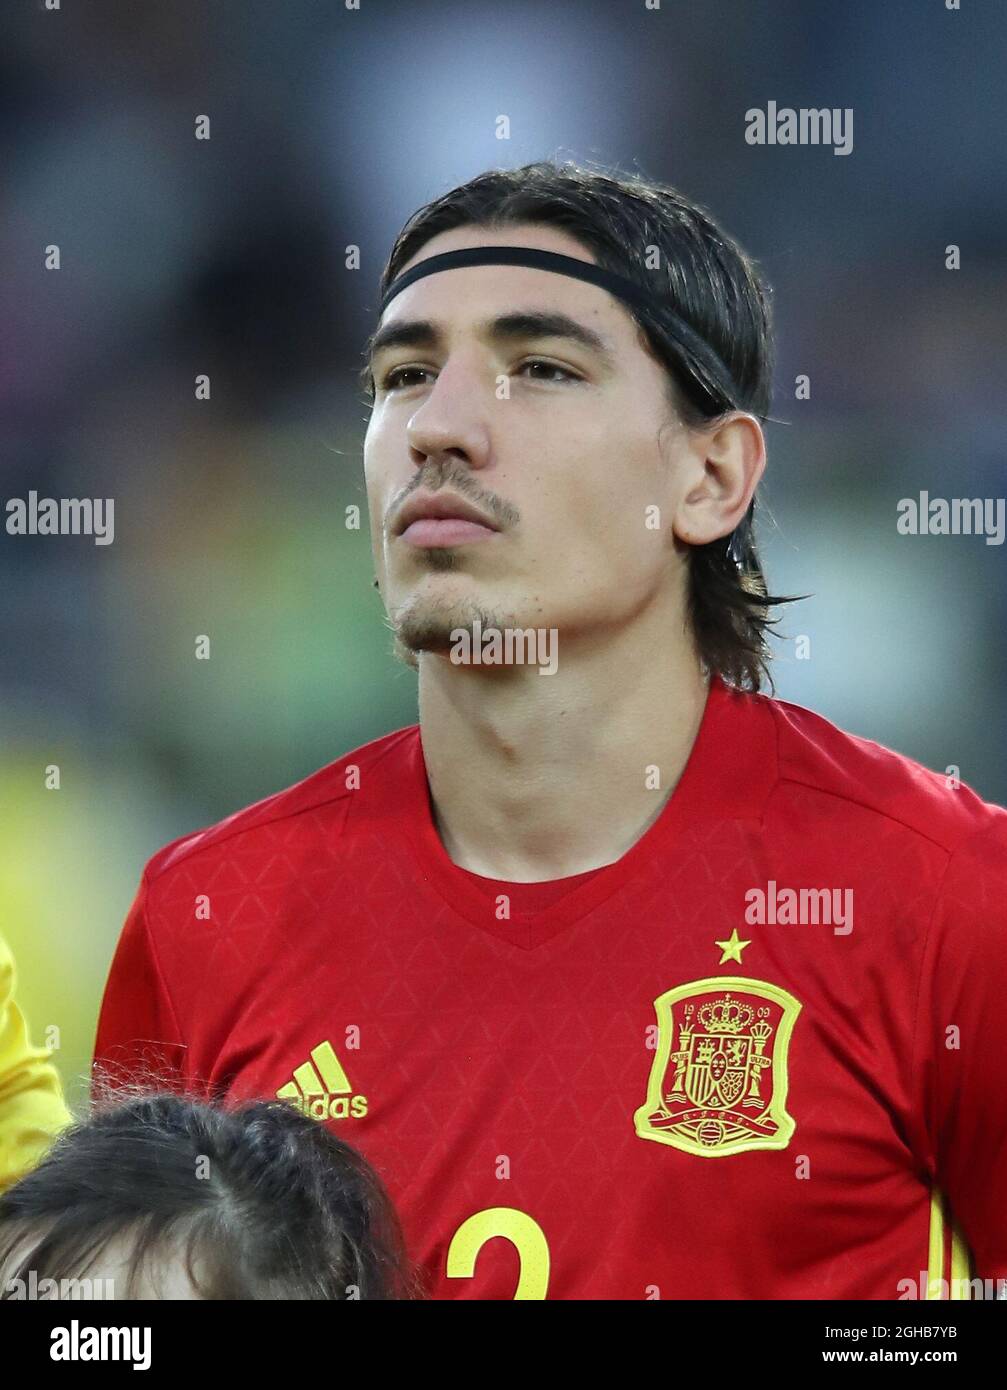 Spain's Hector Bellerin in action during the UEFA Under 21 Final at the  Stadion Cracovia in